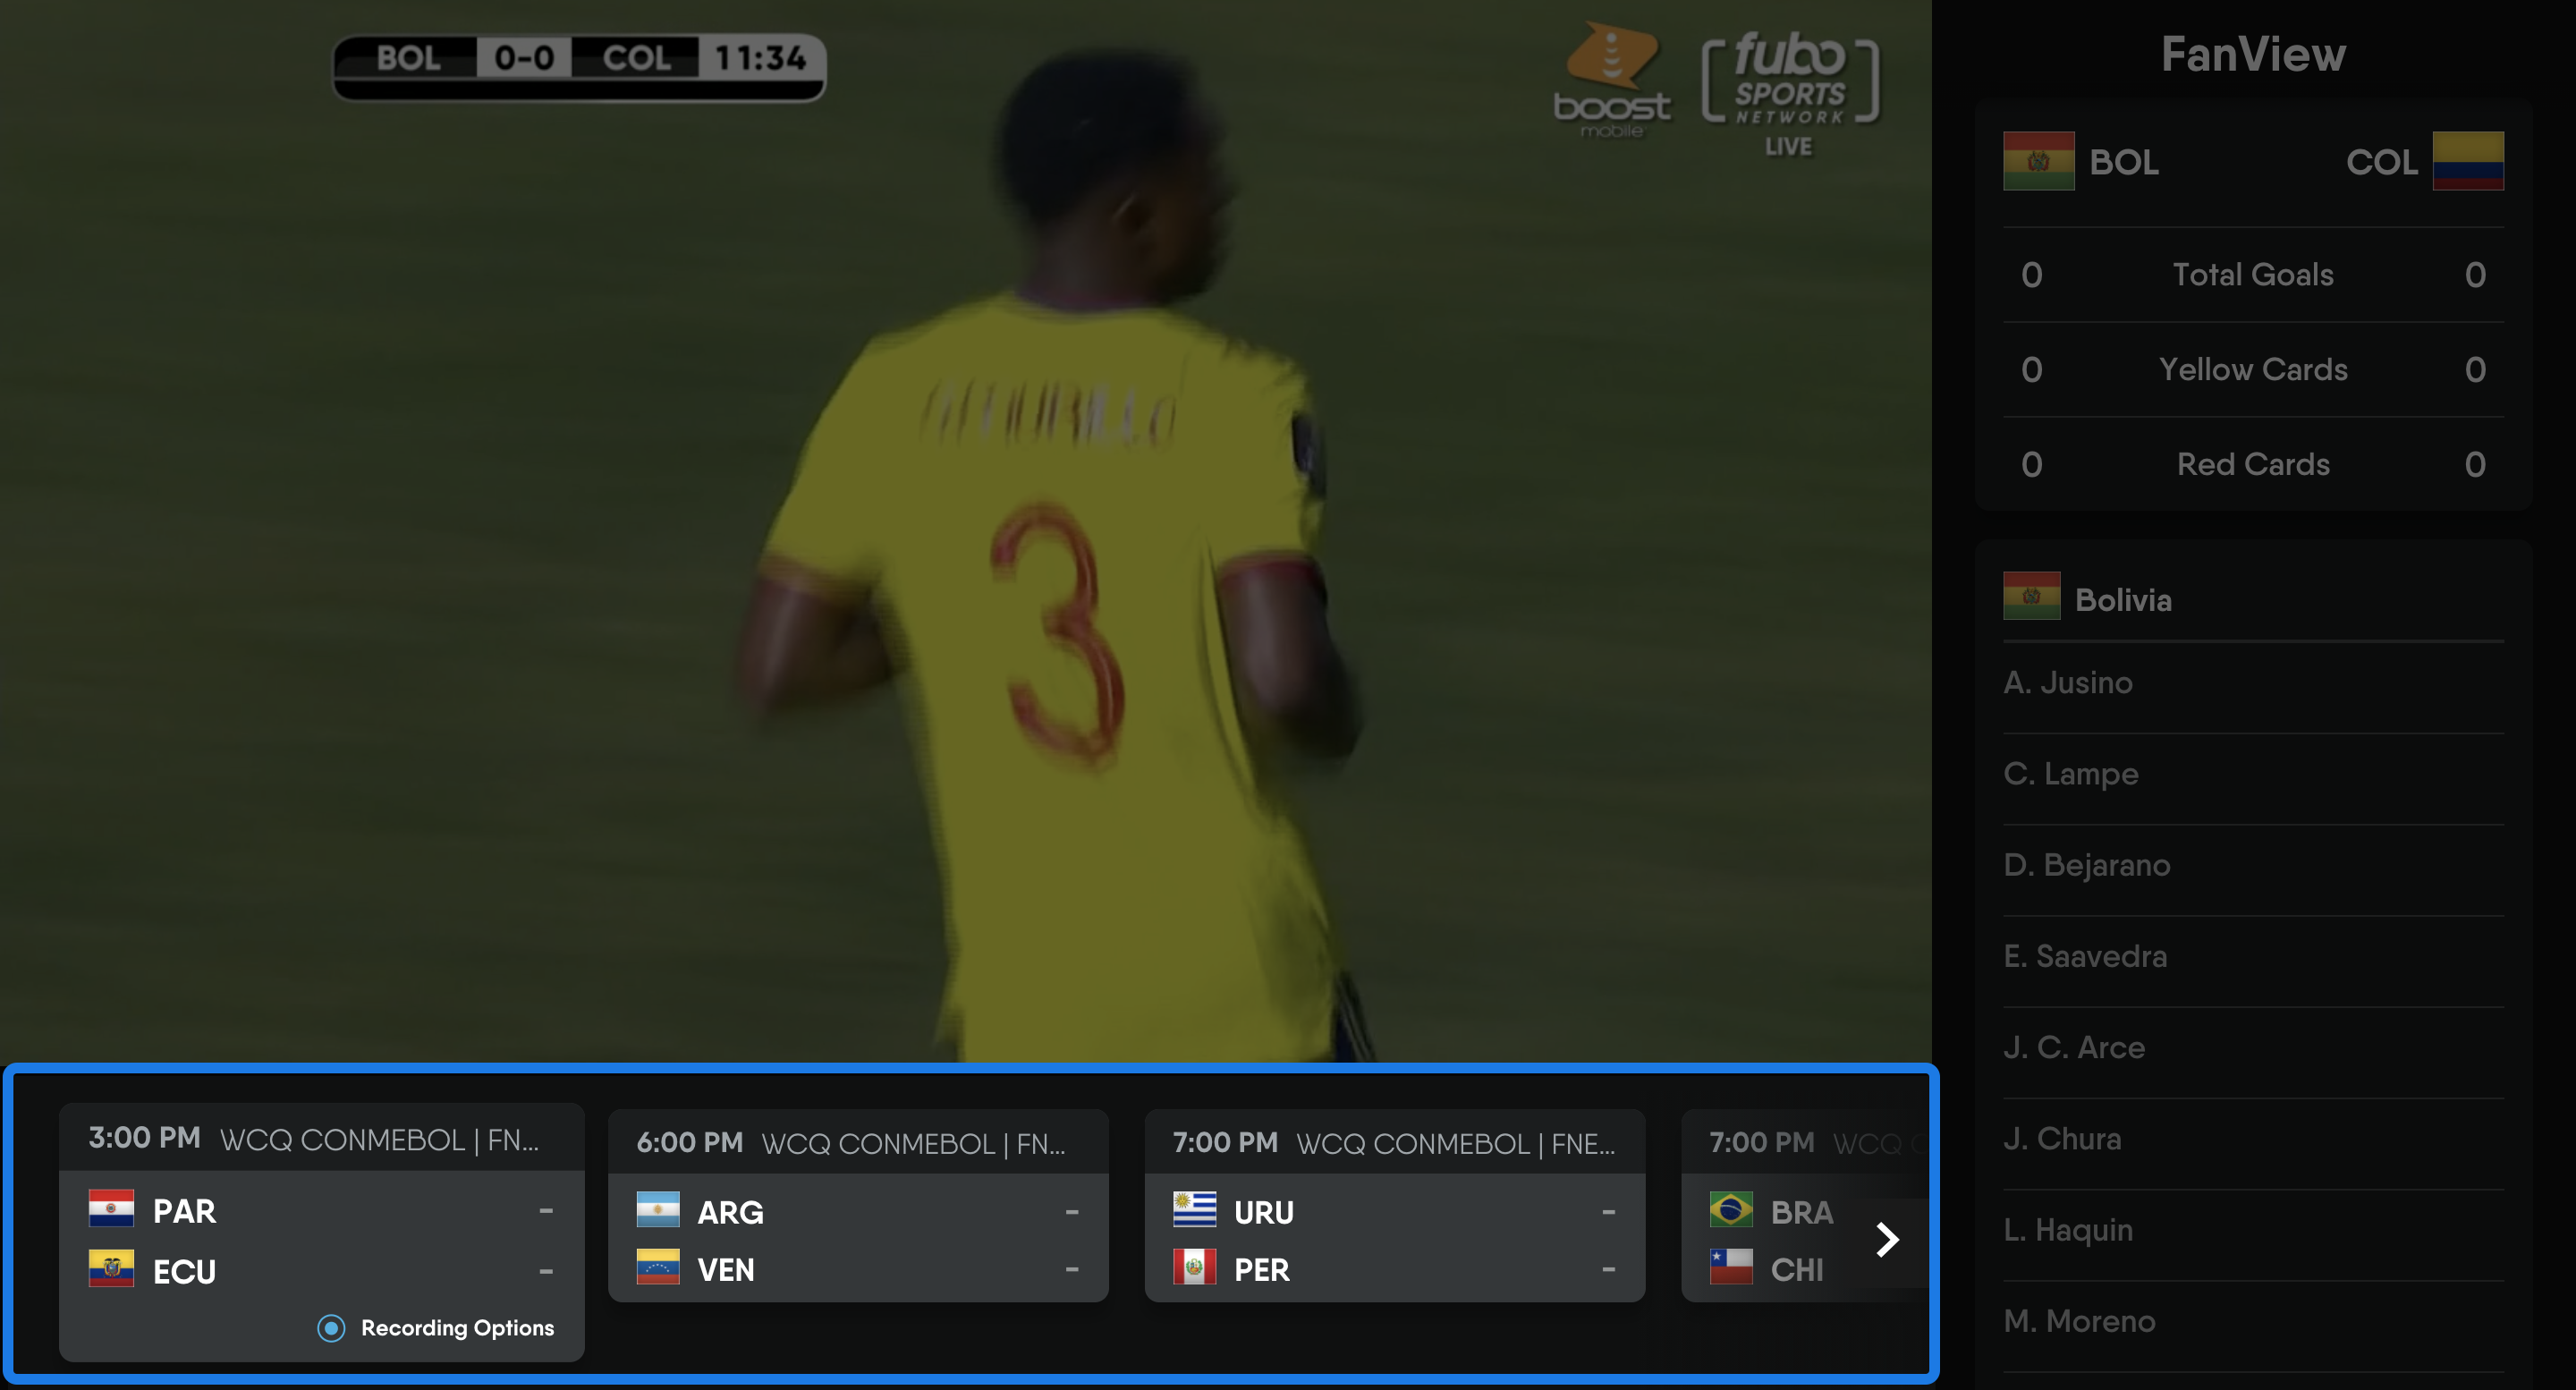 Watching FuboTV on a browser with FanView enabled; scoreboard at bottom of screen highlighted